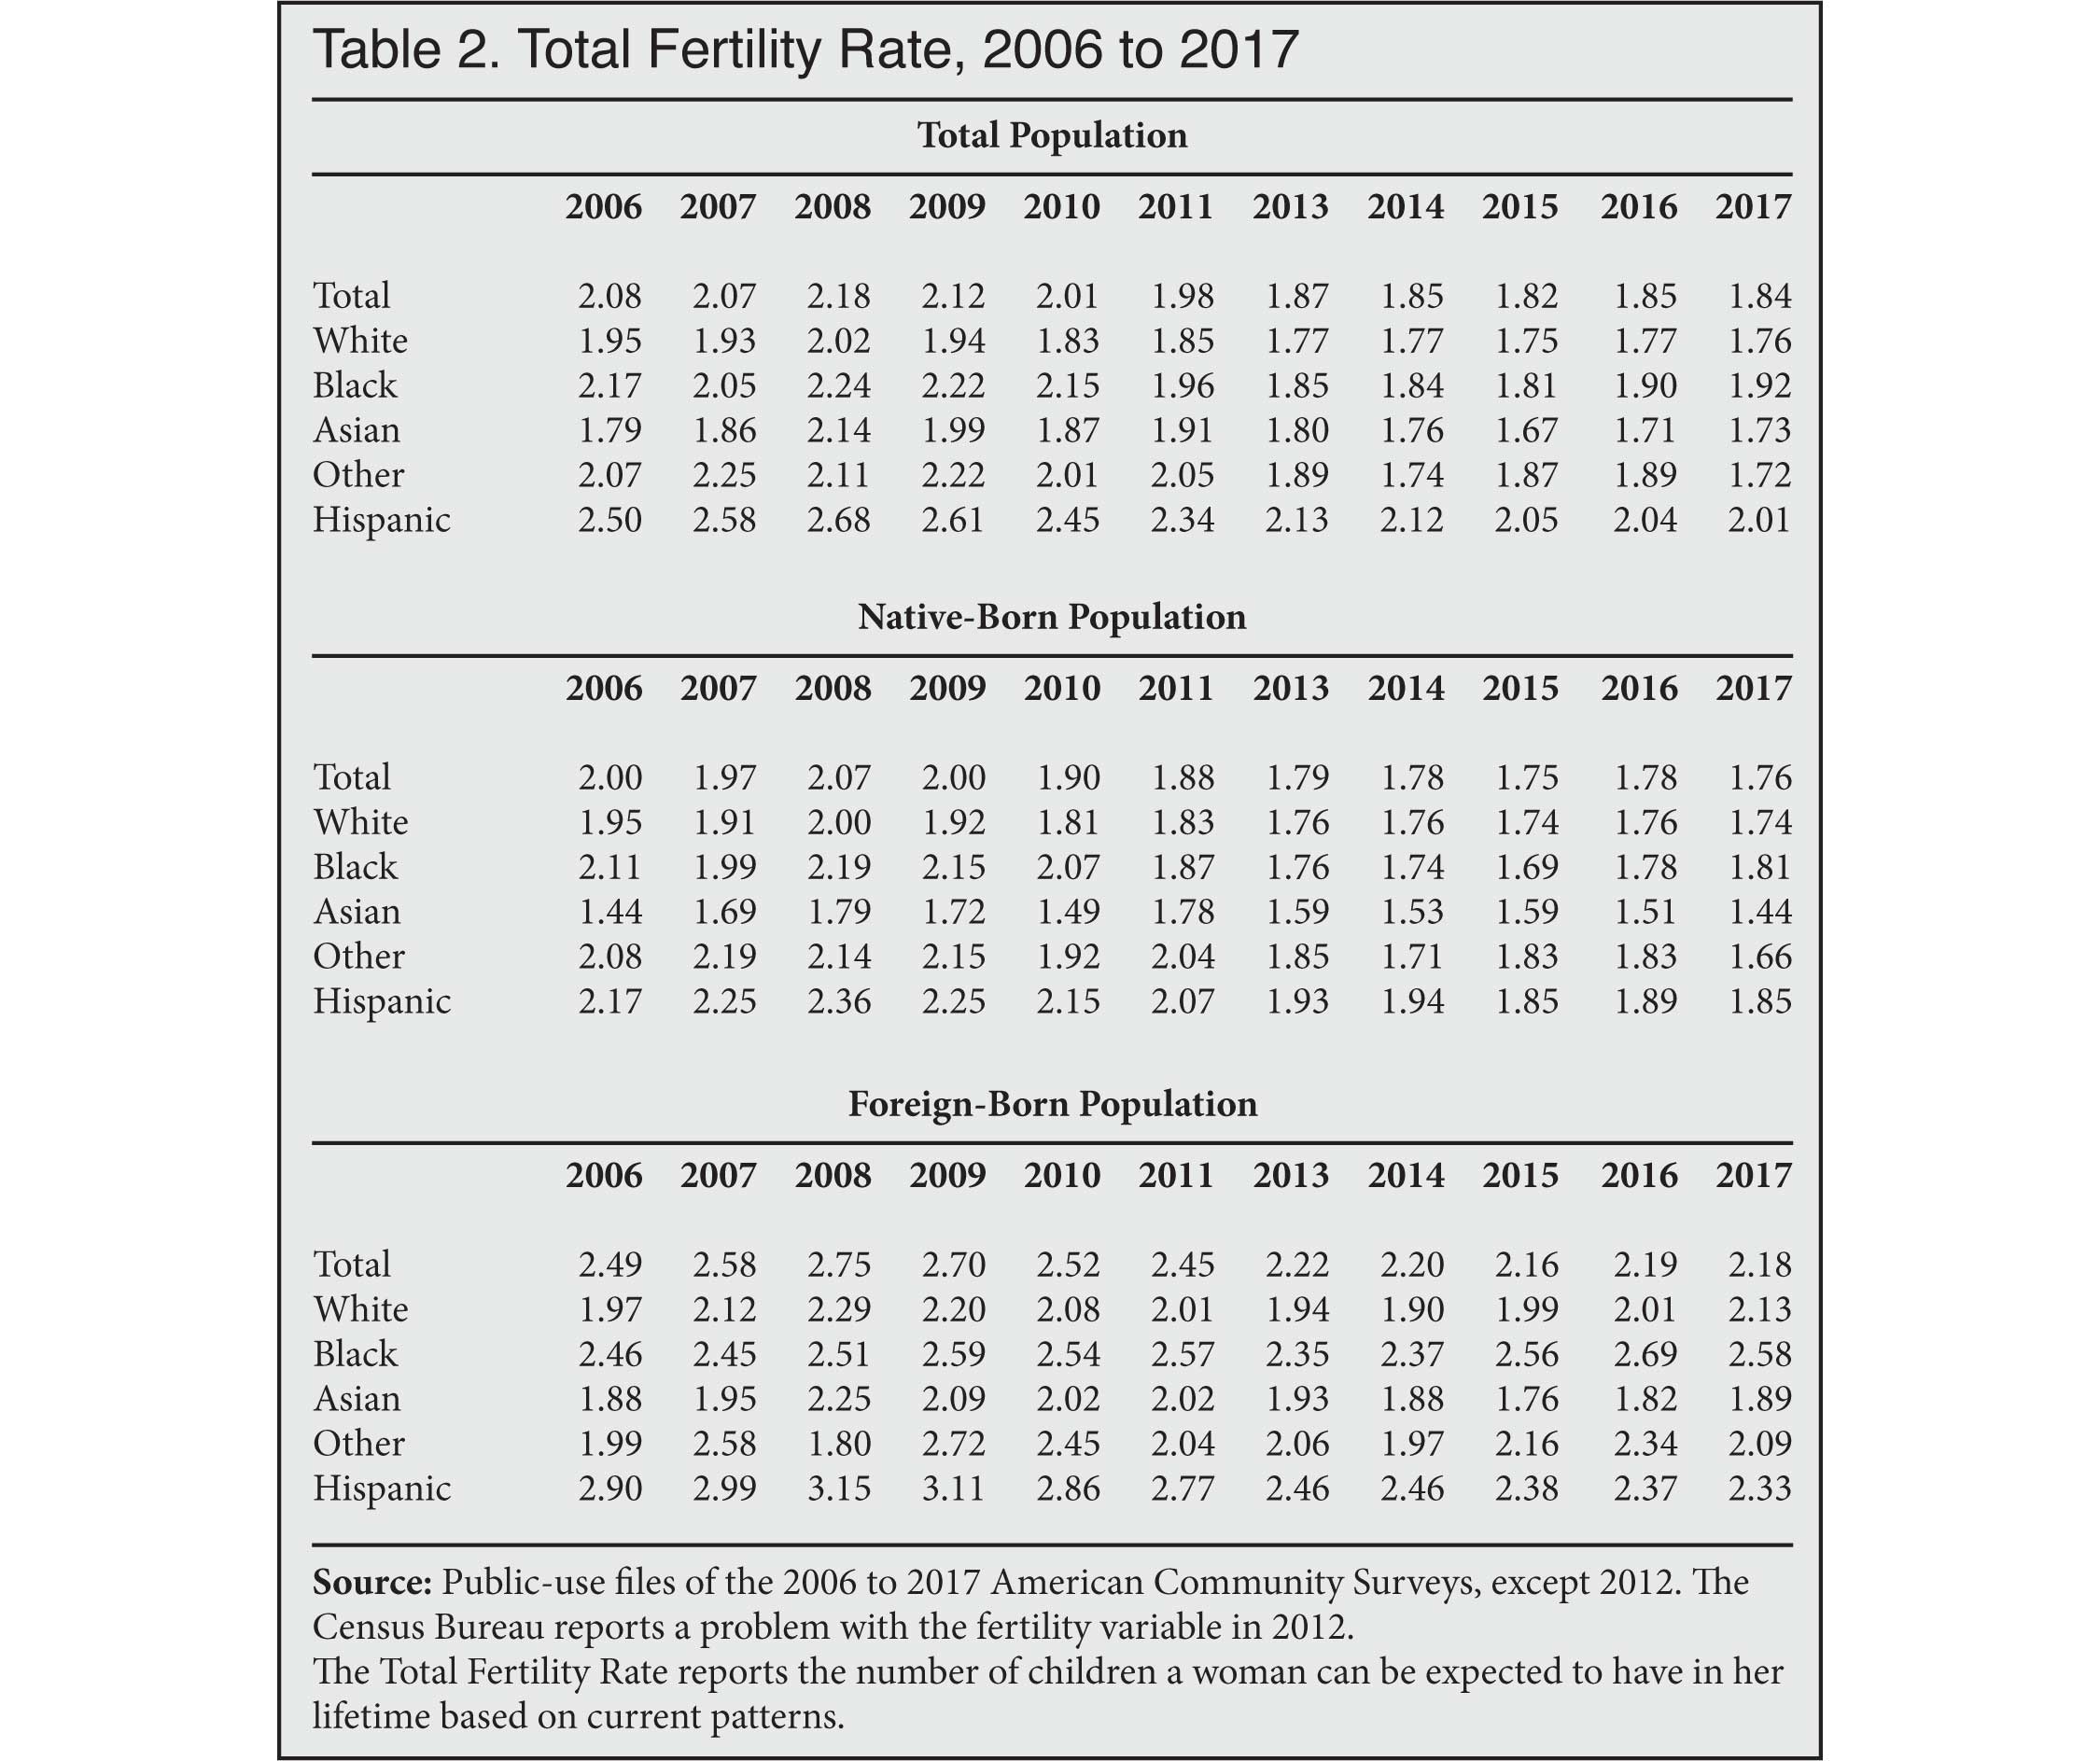 Table: Total Fertility Rate, 2006 to 2017